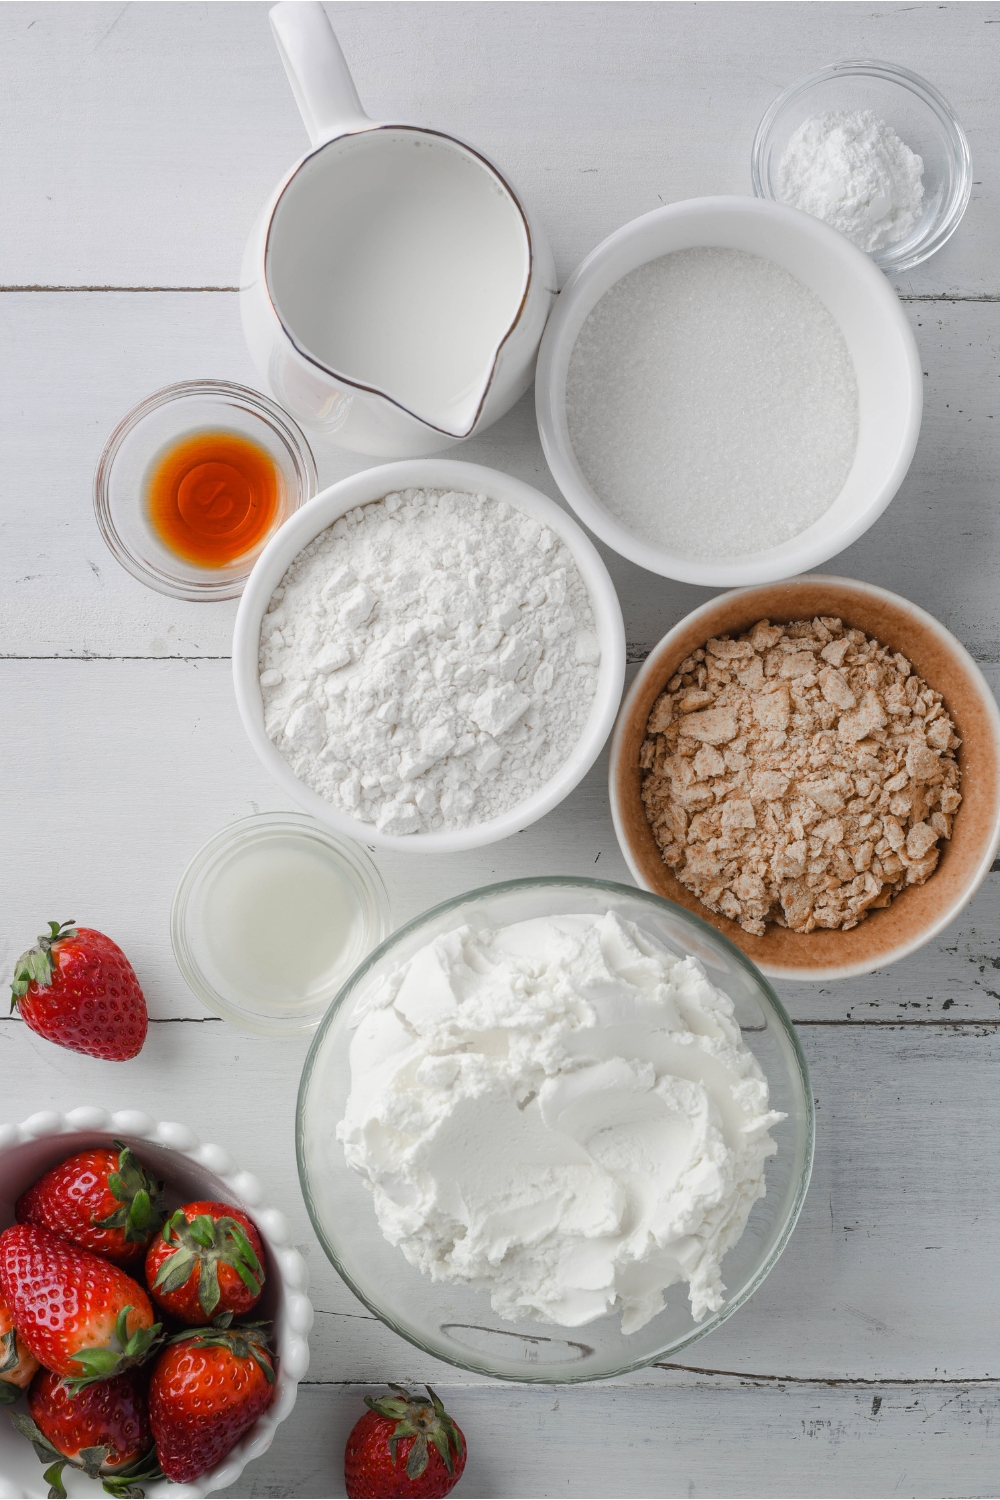 An overhead view of bowls each containing a different ingredient. Such as sugar, flour, Graham cracker crumbs, Cream cheese, Lemon juice, vanilla, baking powder, and milk.